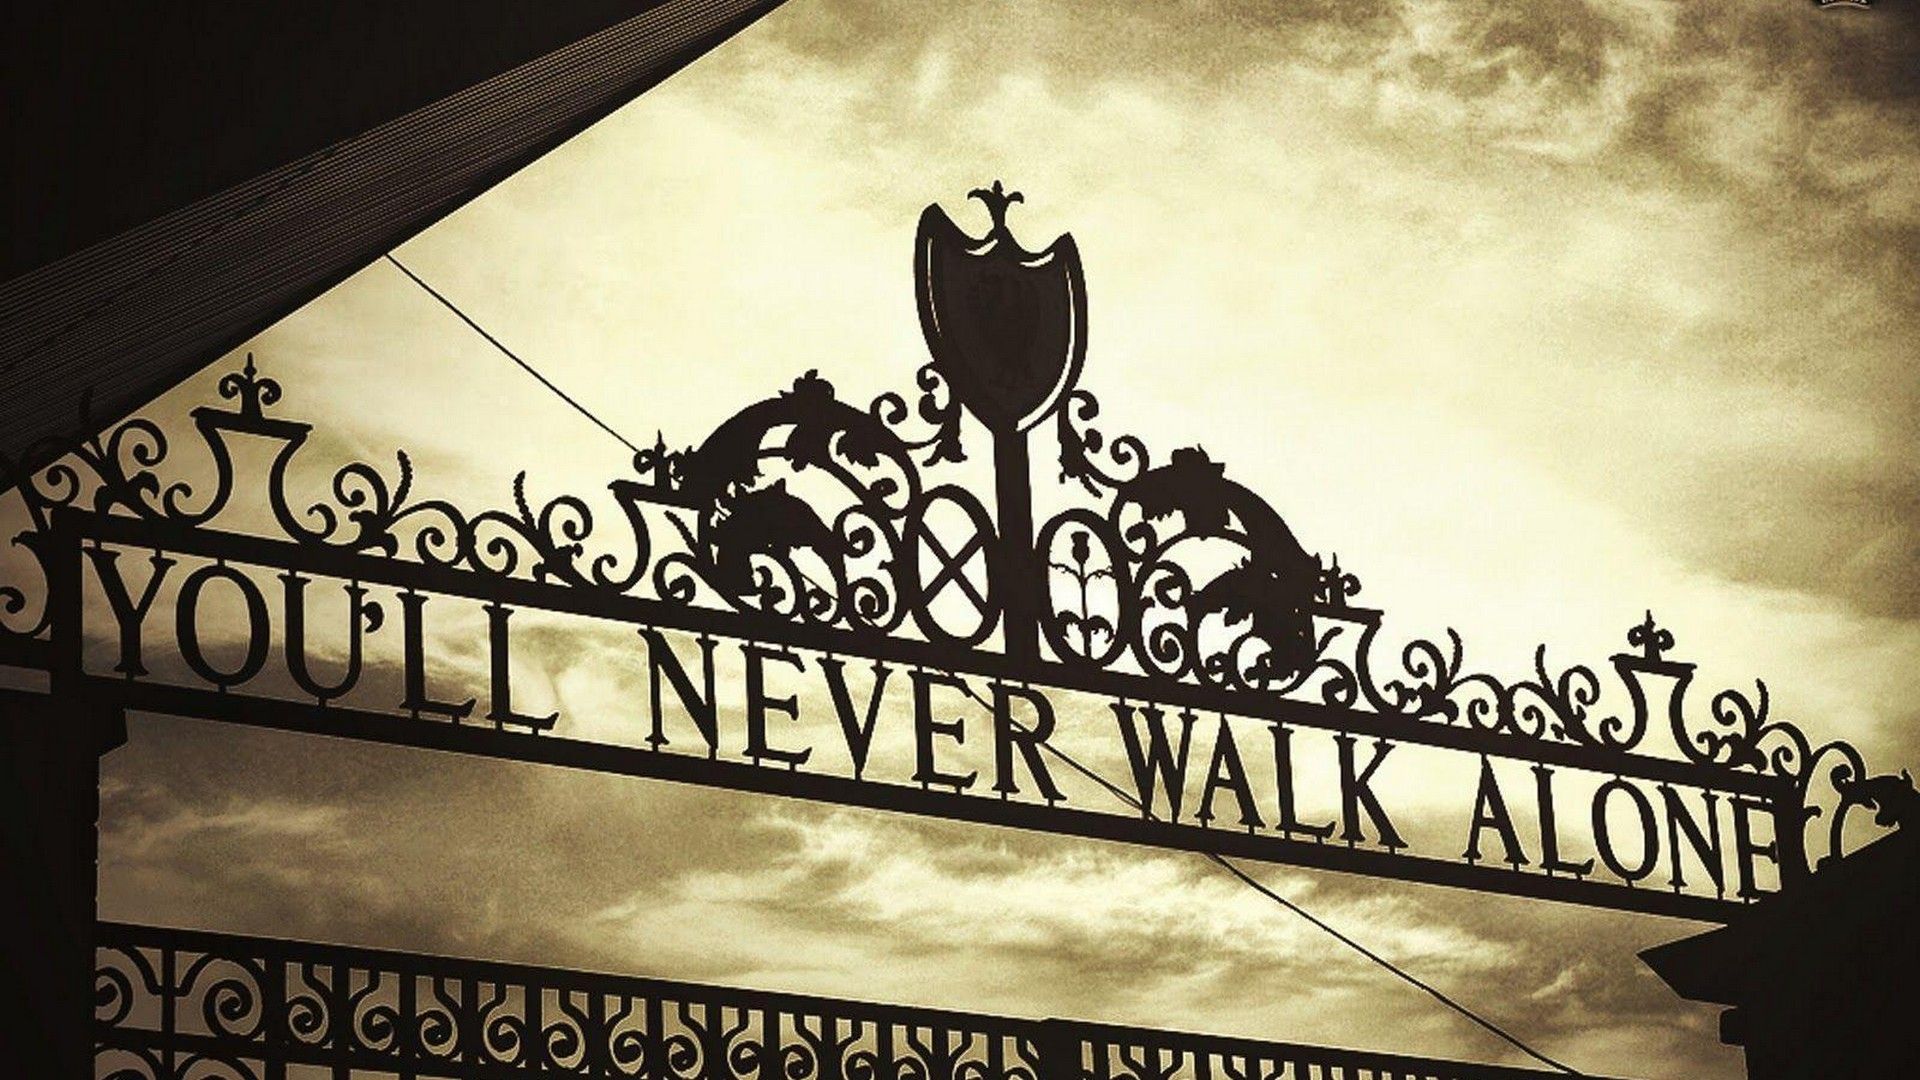 Liverpool Youll never walk alone